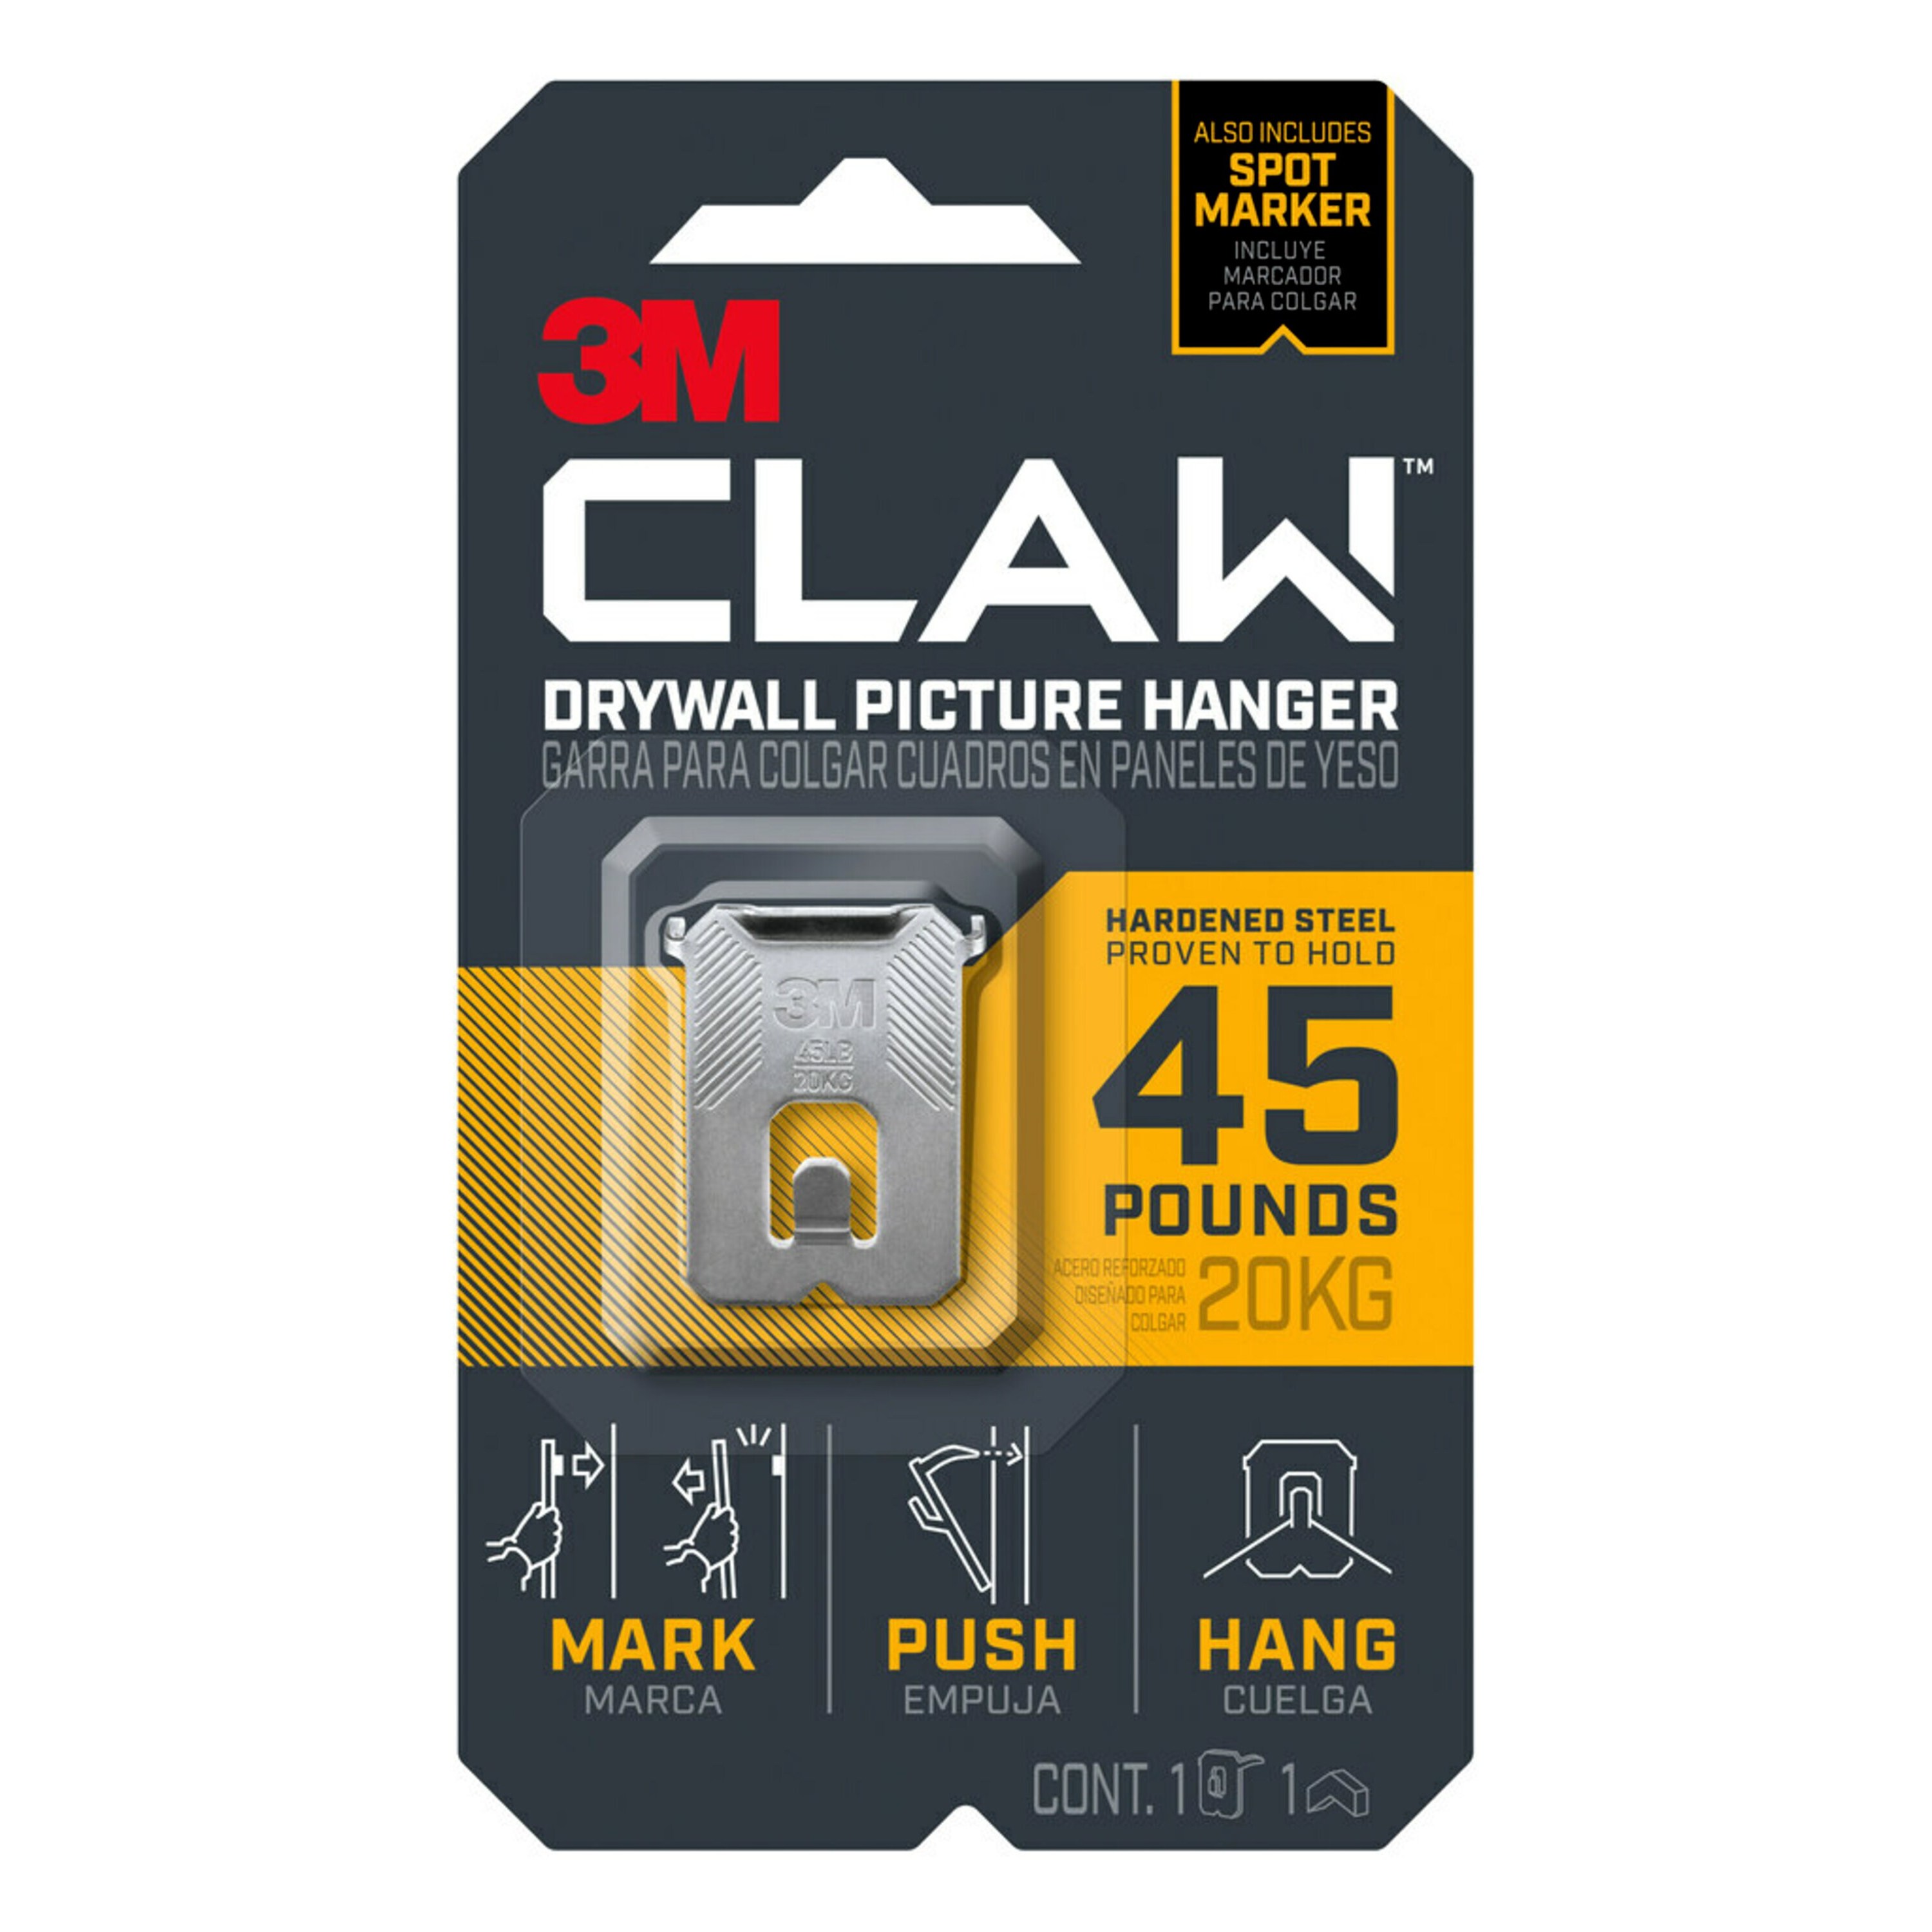 3M CLAW Drywall Picture Hangers Stainless Steel Hanging Storage/Utility  Hook (45-lb Capacity)